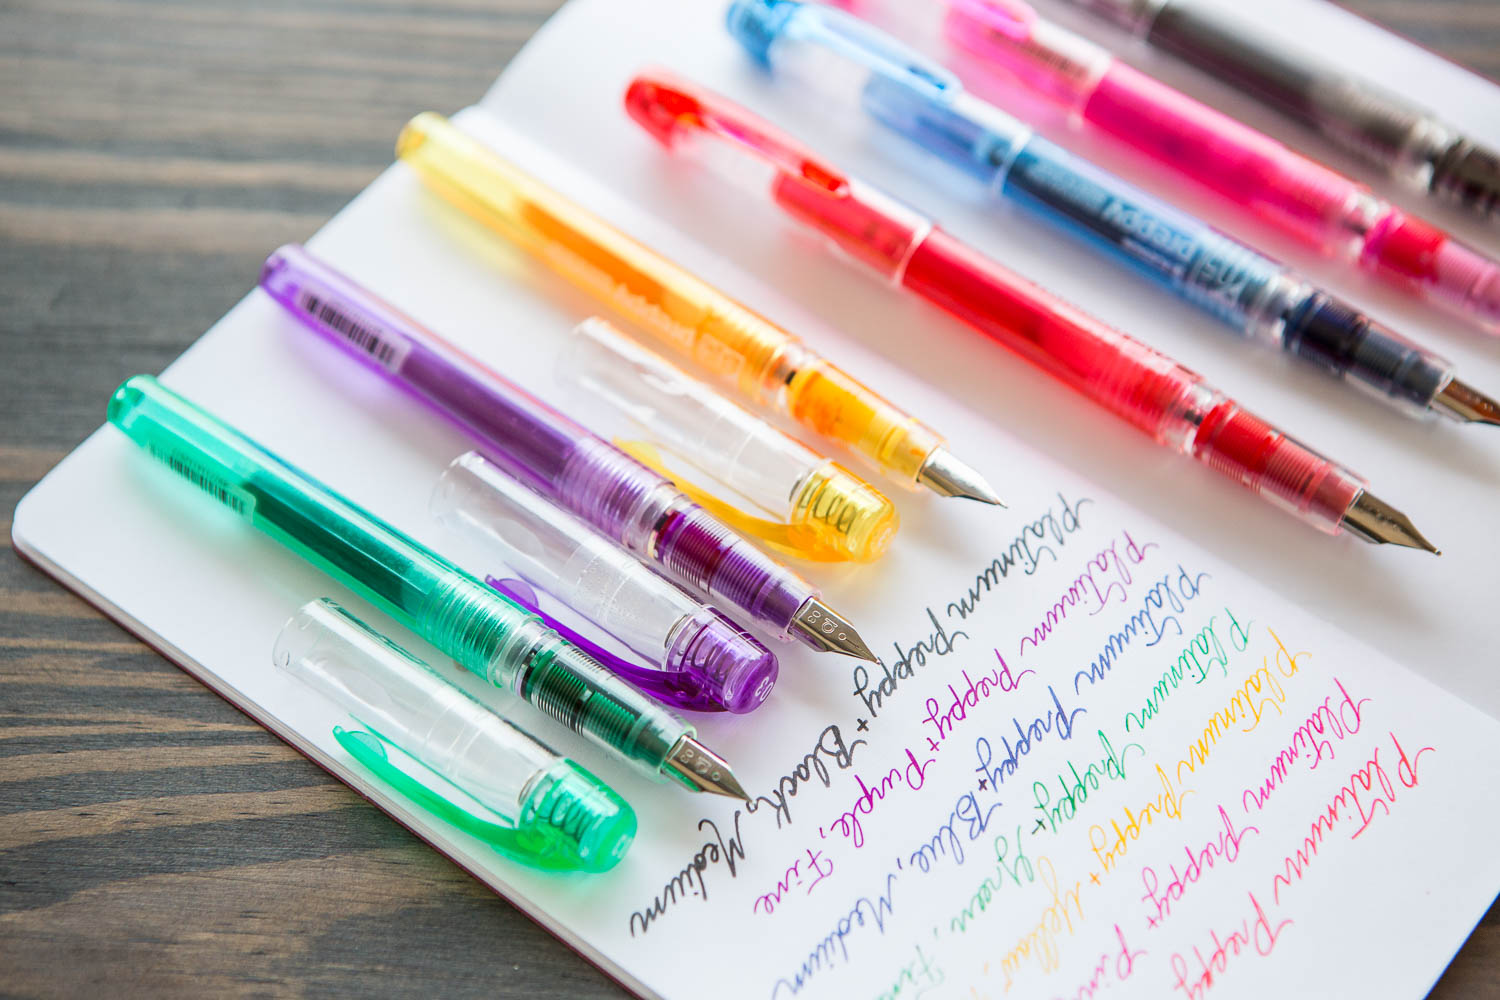 Platinum Preppy fountain pens in a variety of rainbow colors